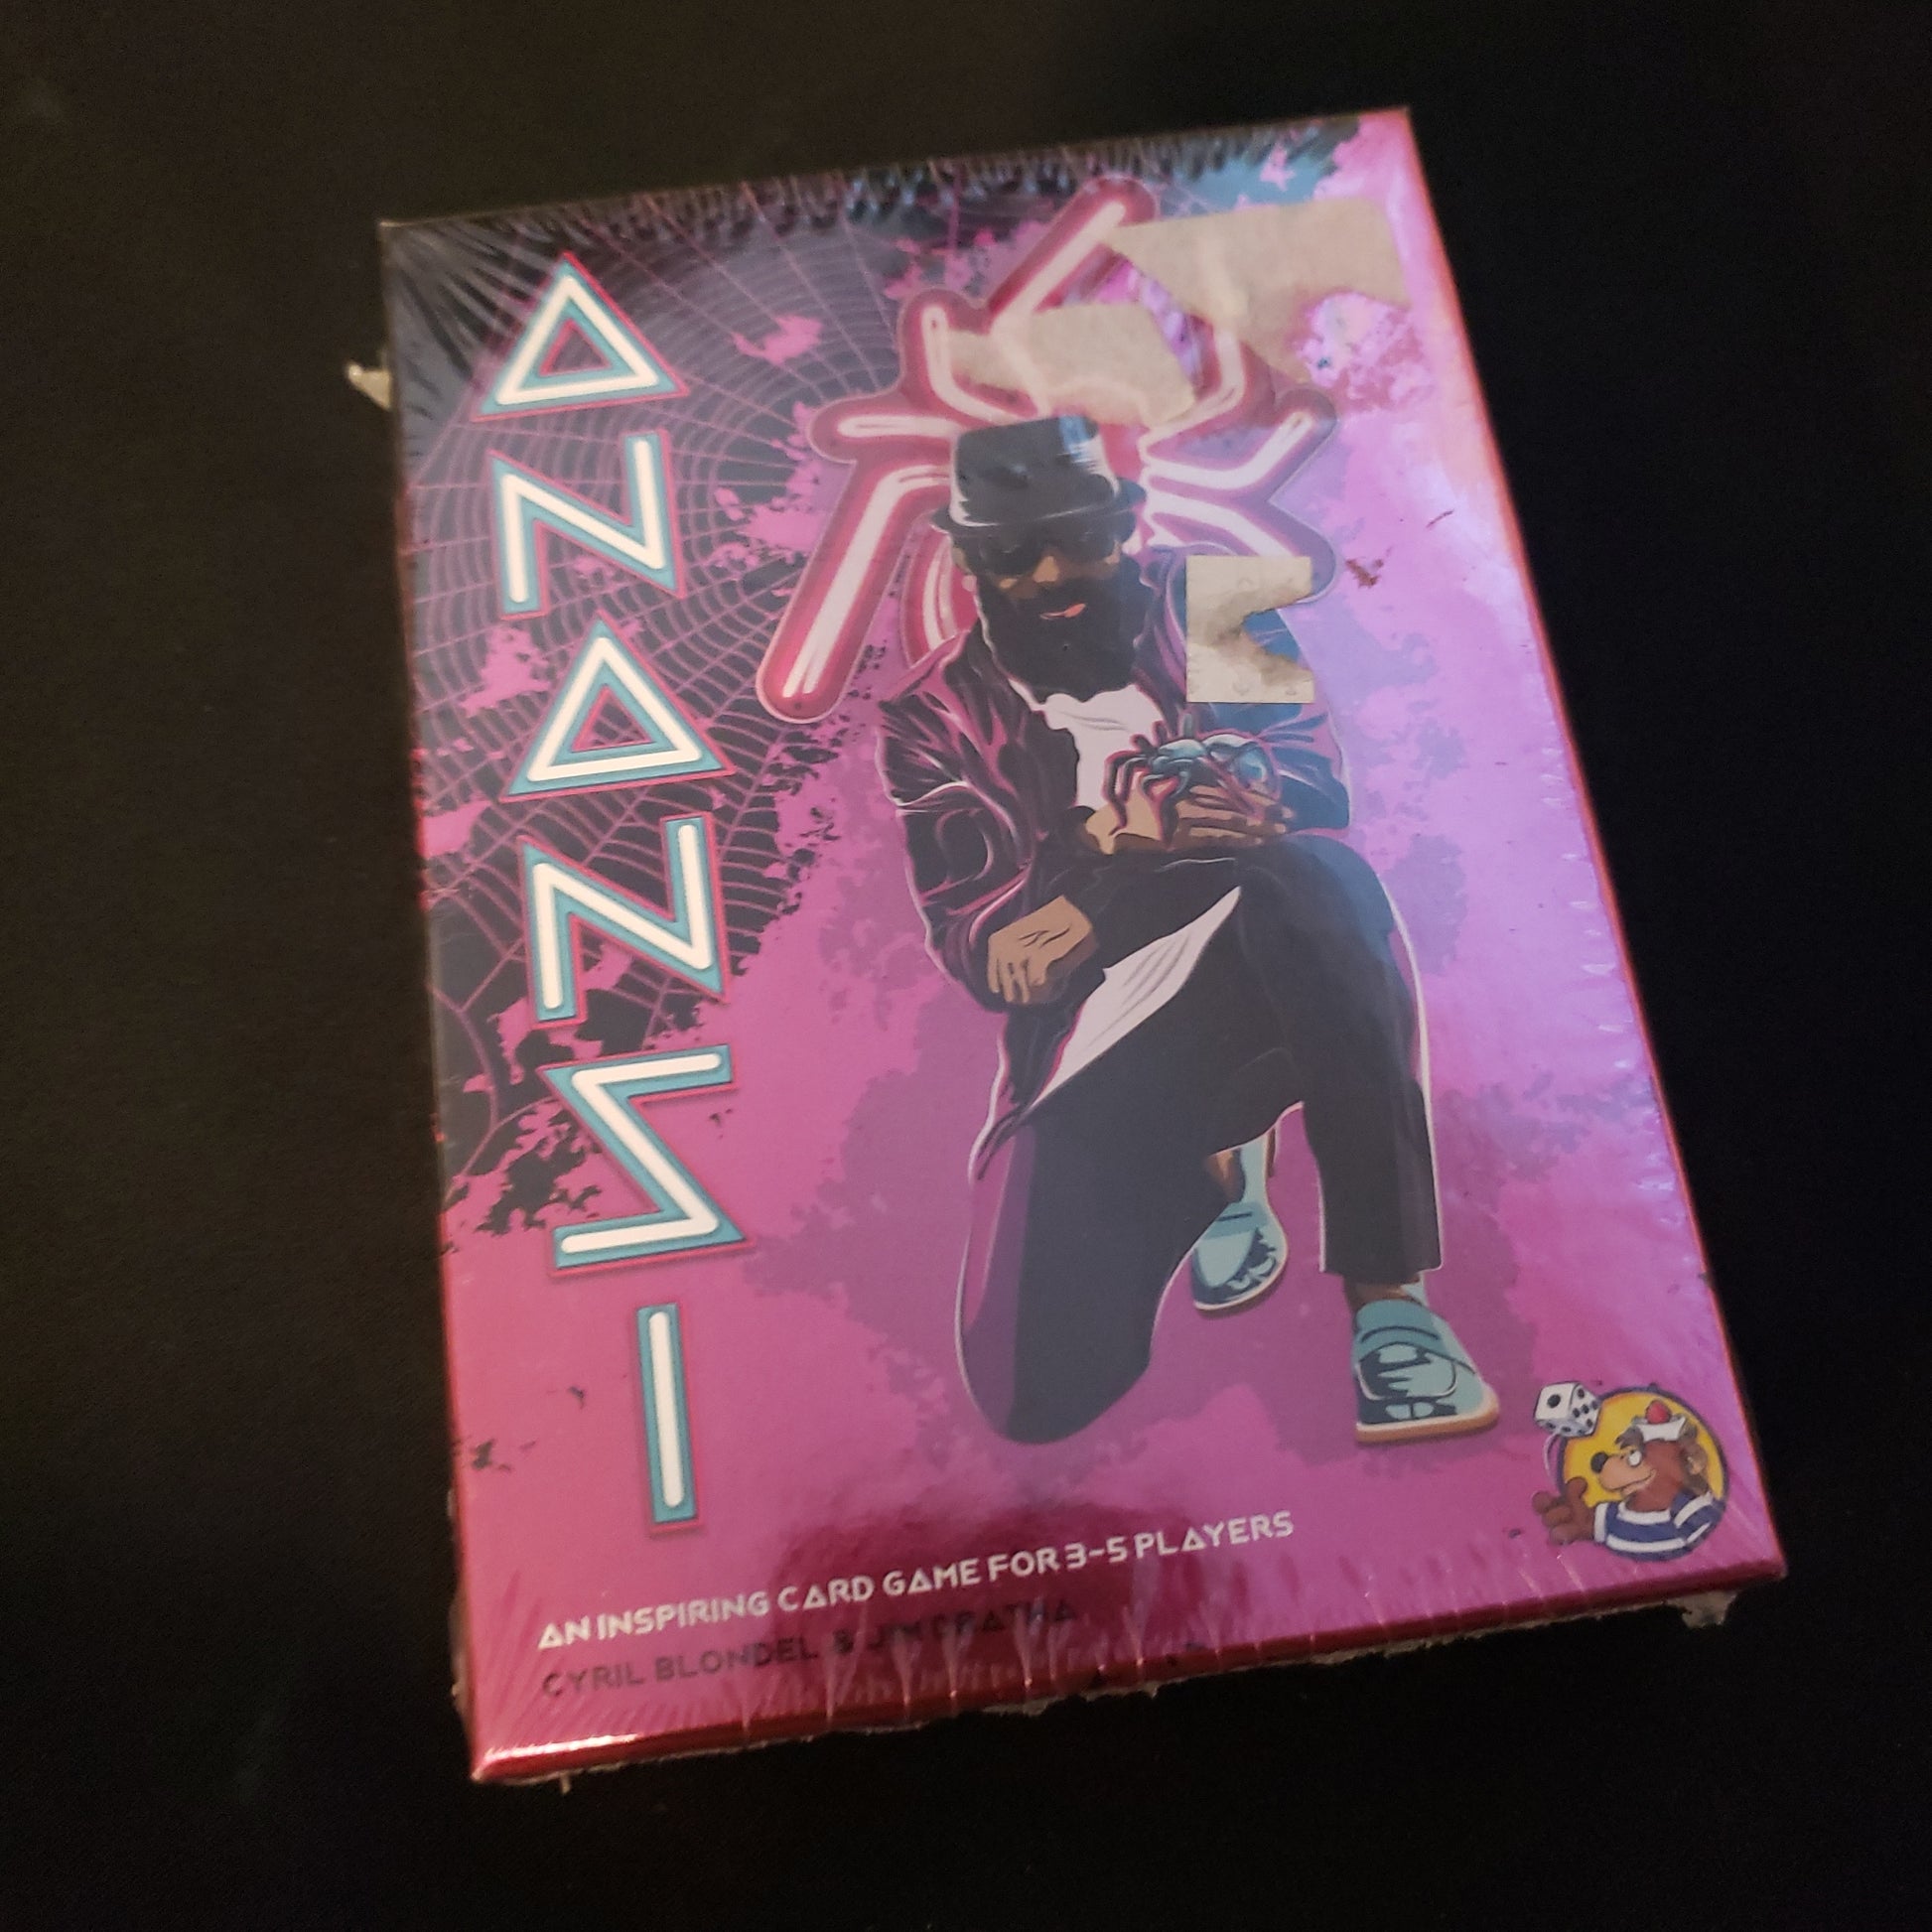 Image shows the front cover of the box of the Anansi coard game